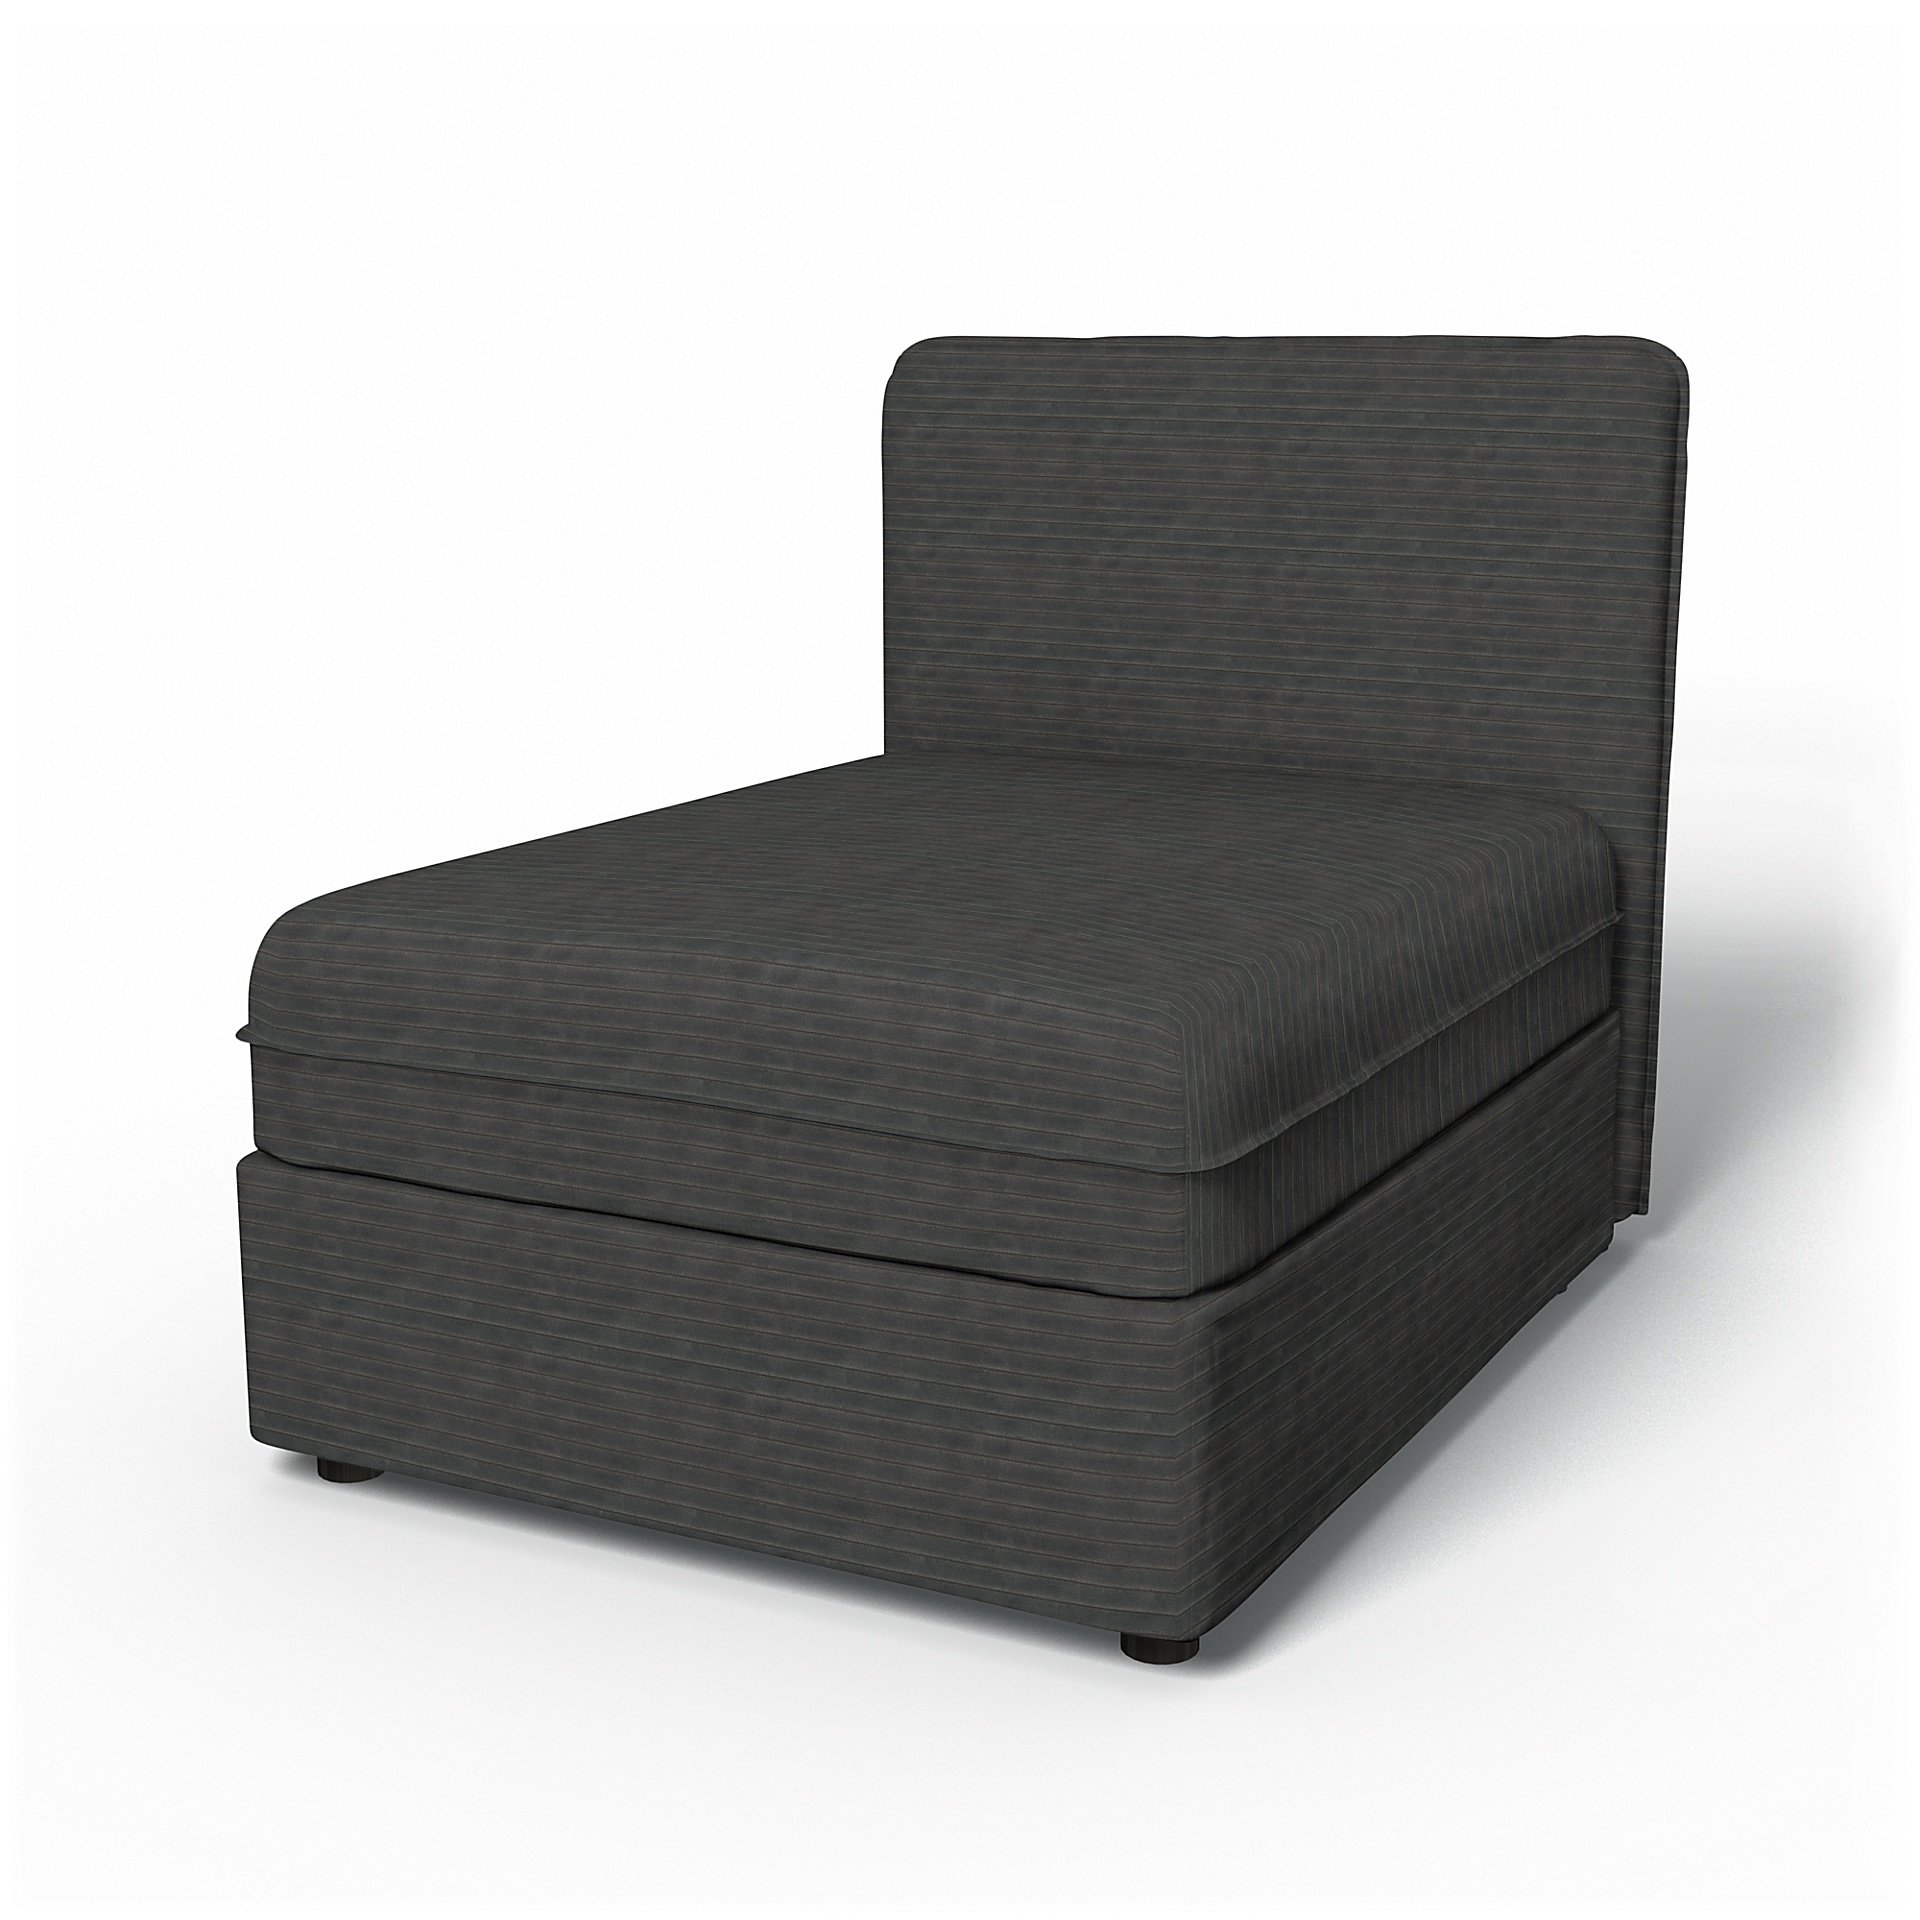 IKEA - Vallentuna Seat Module with Low Back Cover 80x100cm 32x39in, Licorice, Corduroy - Bemz